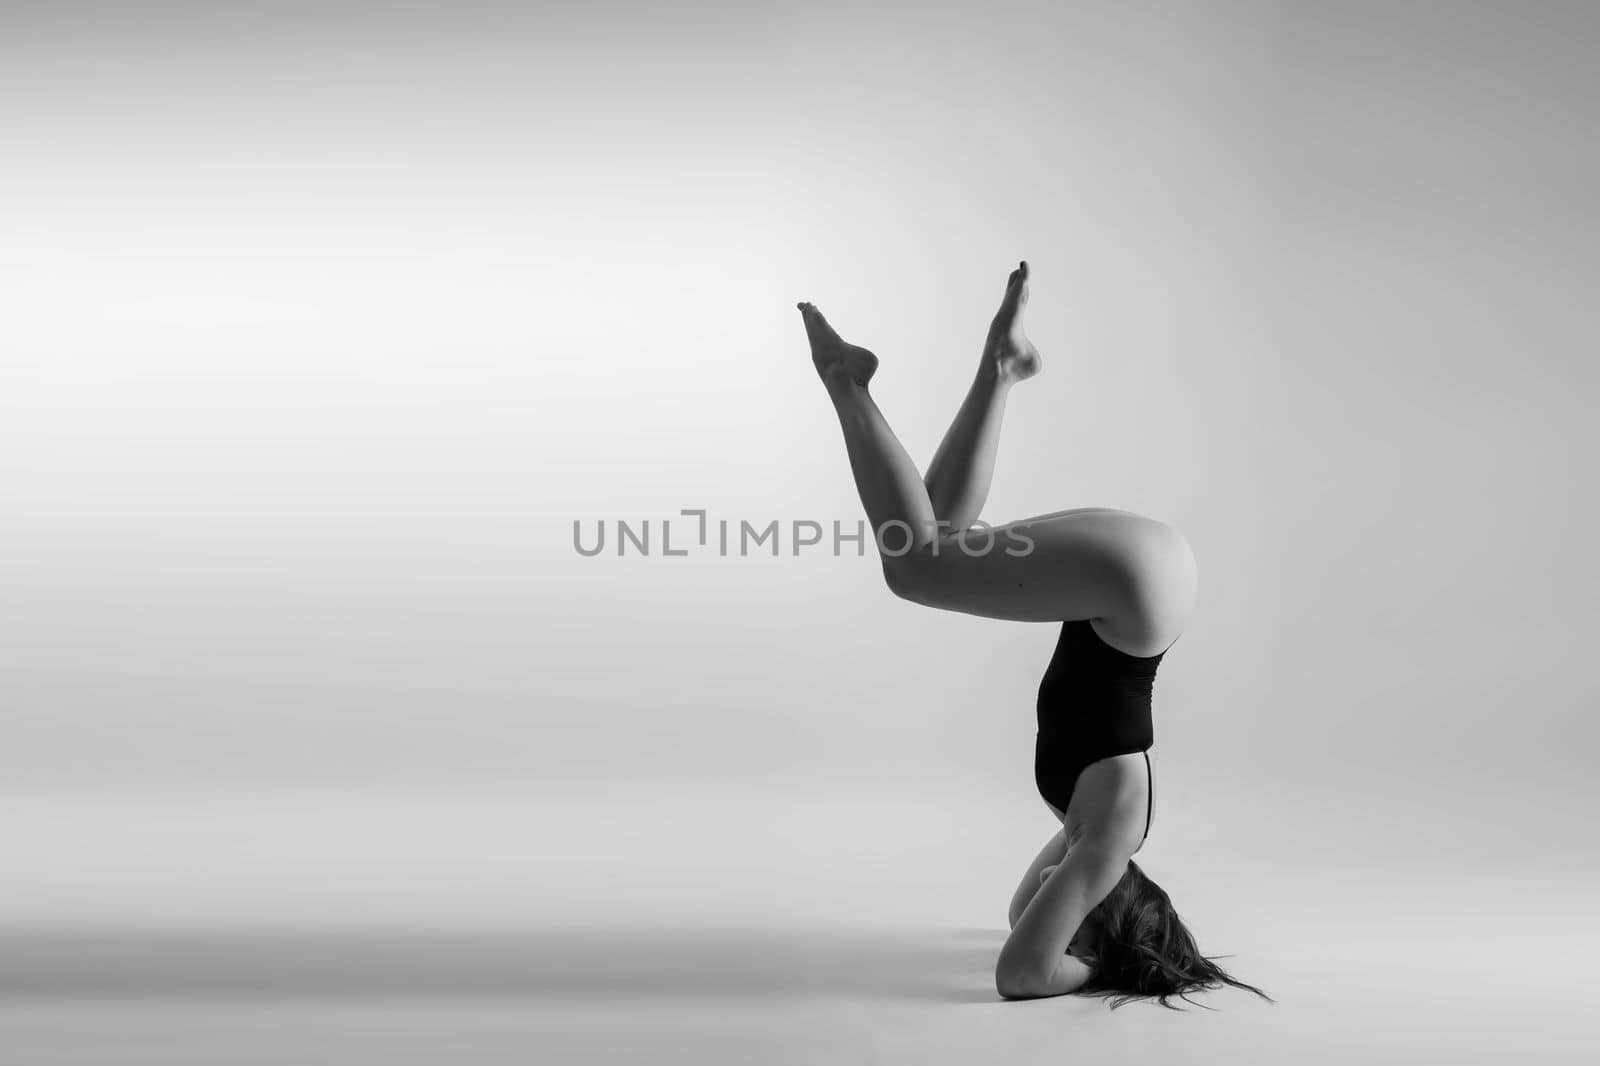 Portrait of a beautiful young woman wearing black sportswear working out in studio. Full length.